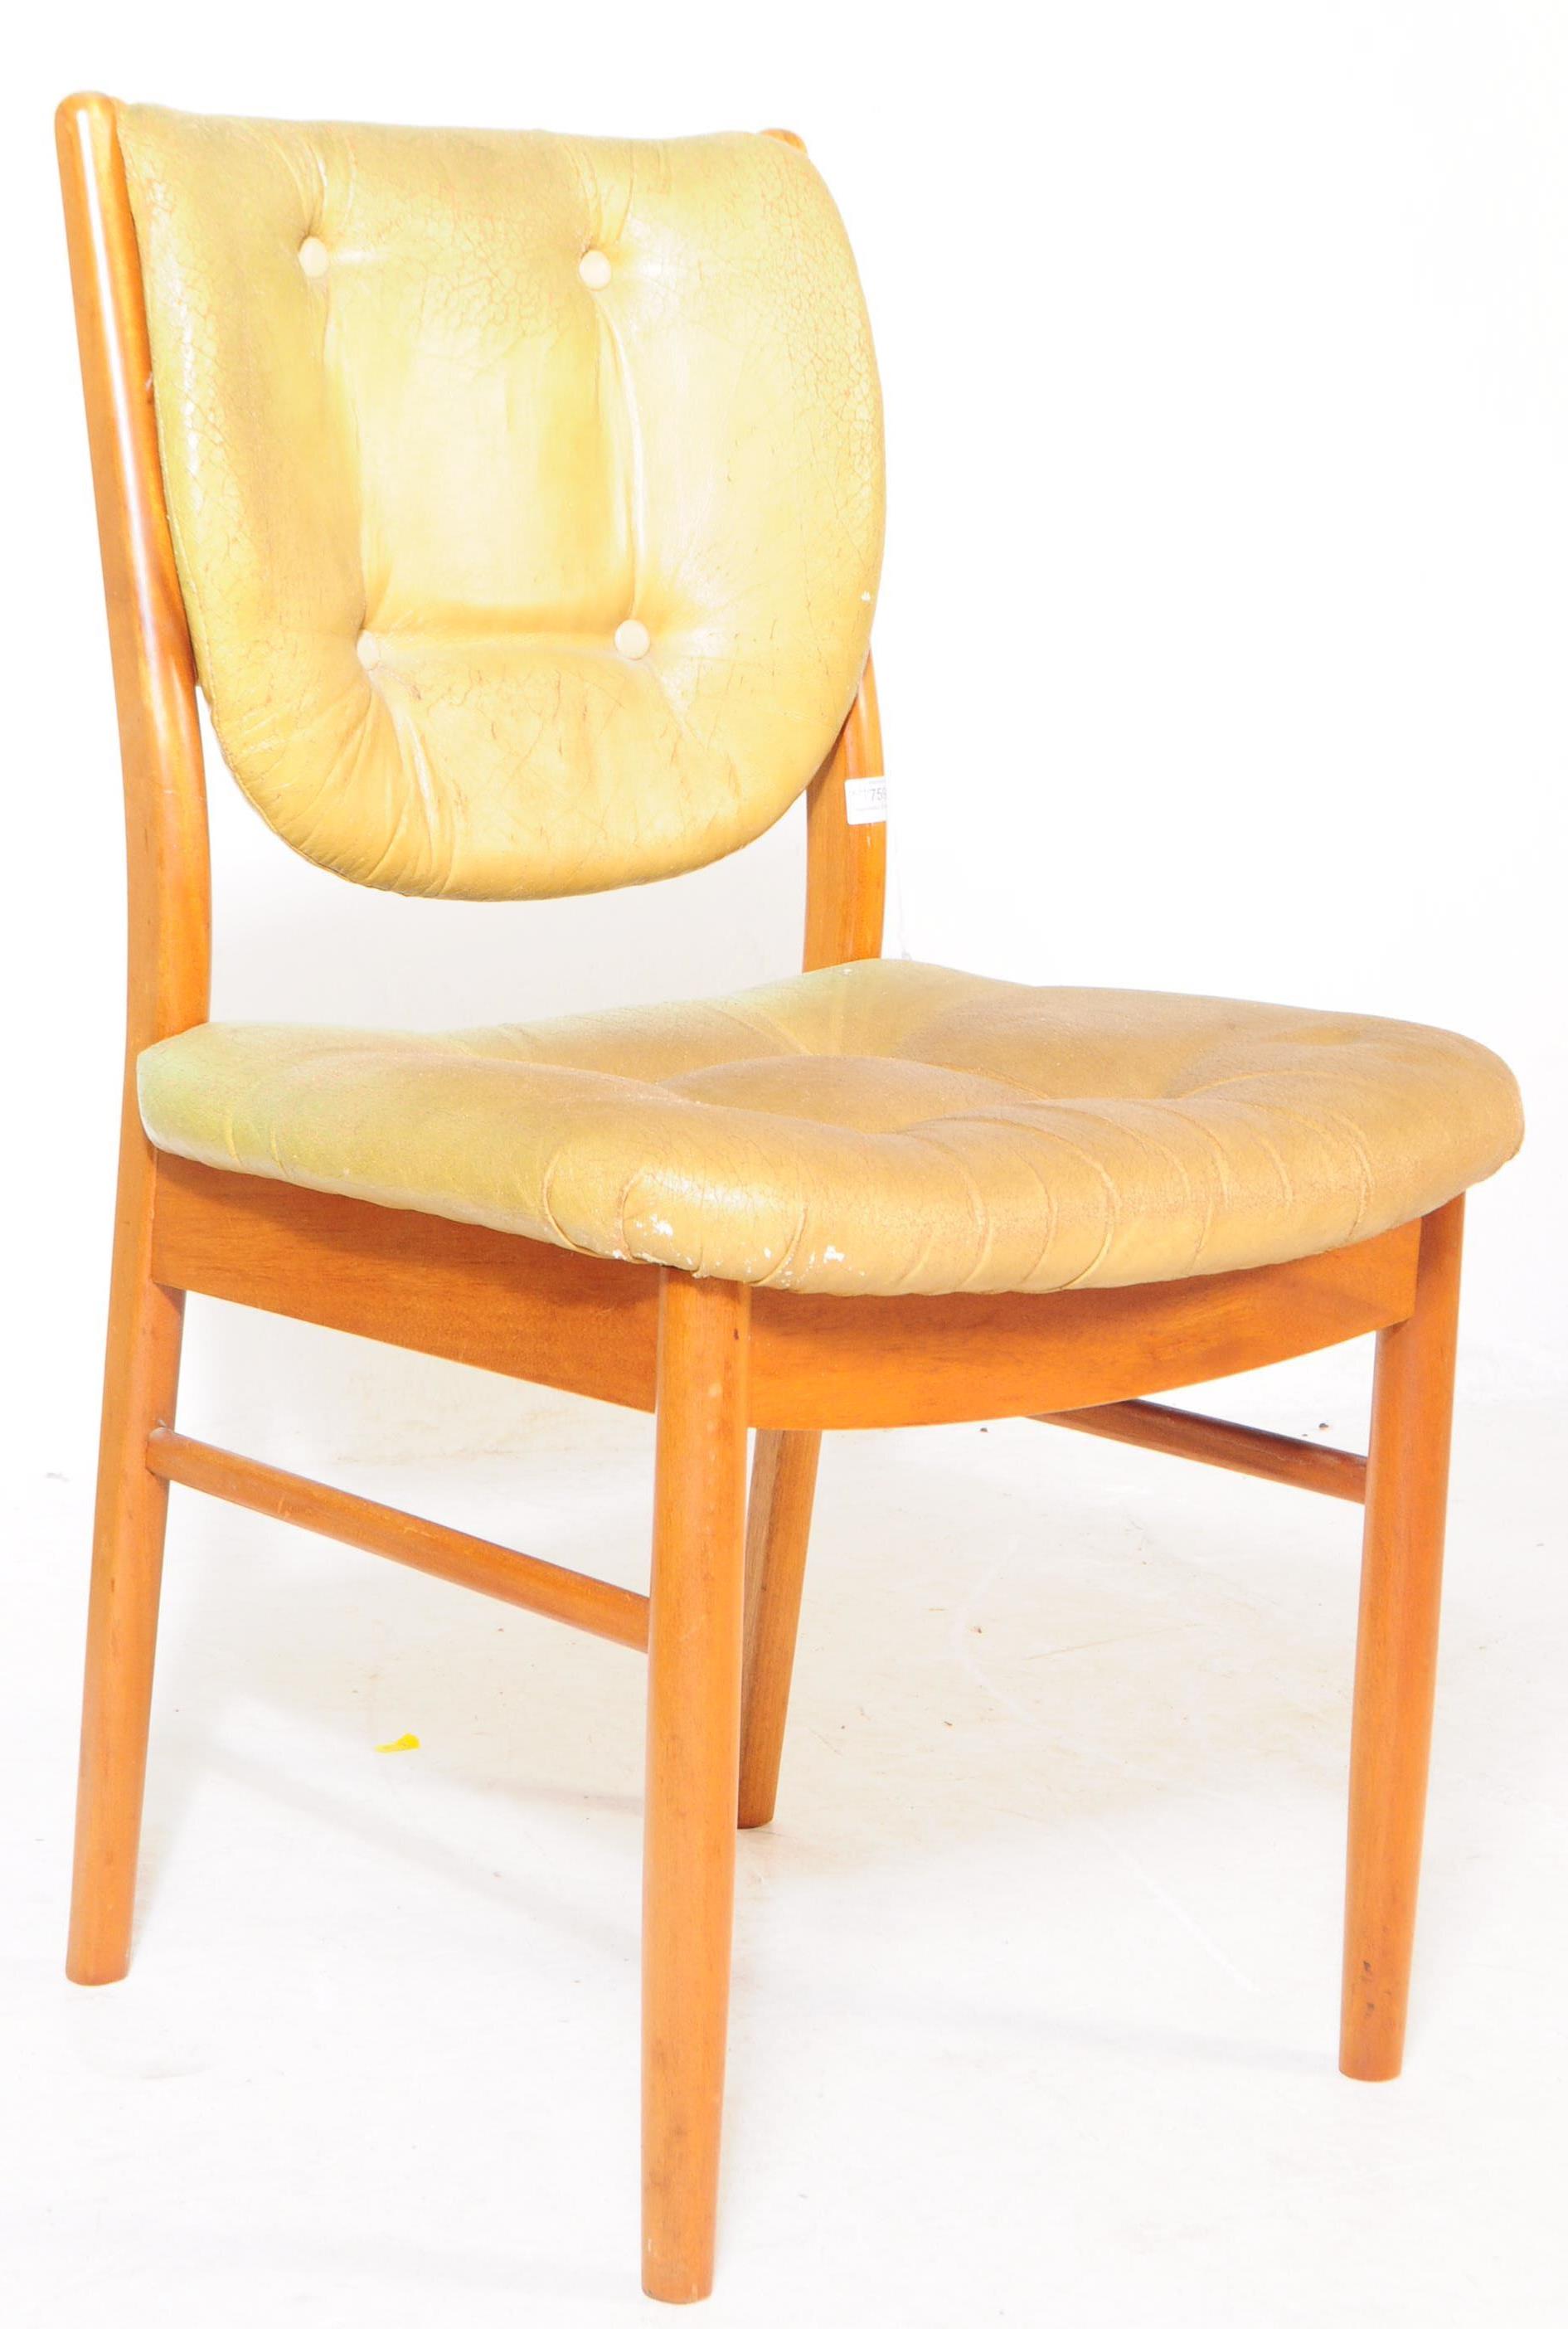 BRITISH MODERN DESIGN - SET OF FOUR VINTAGE DINING CHAIRS - Image 3 of 4